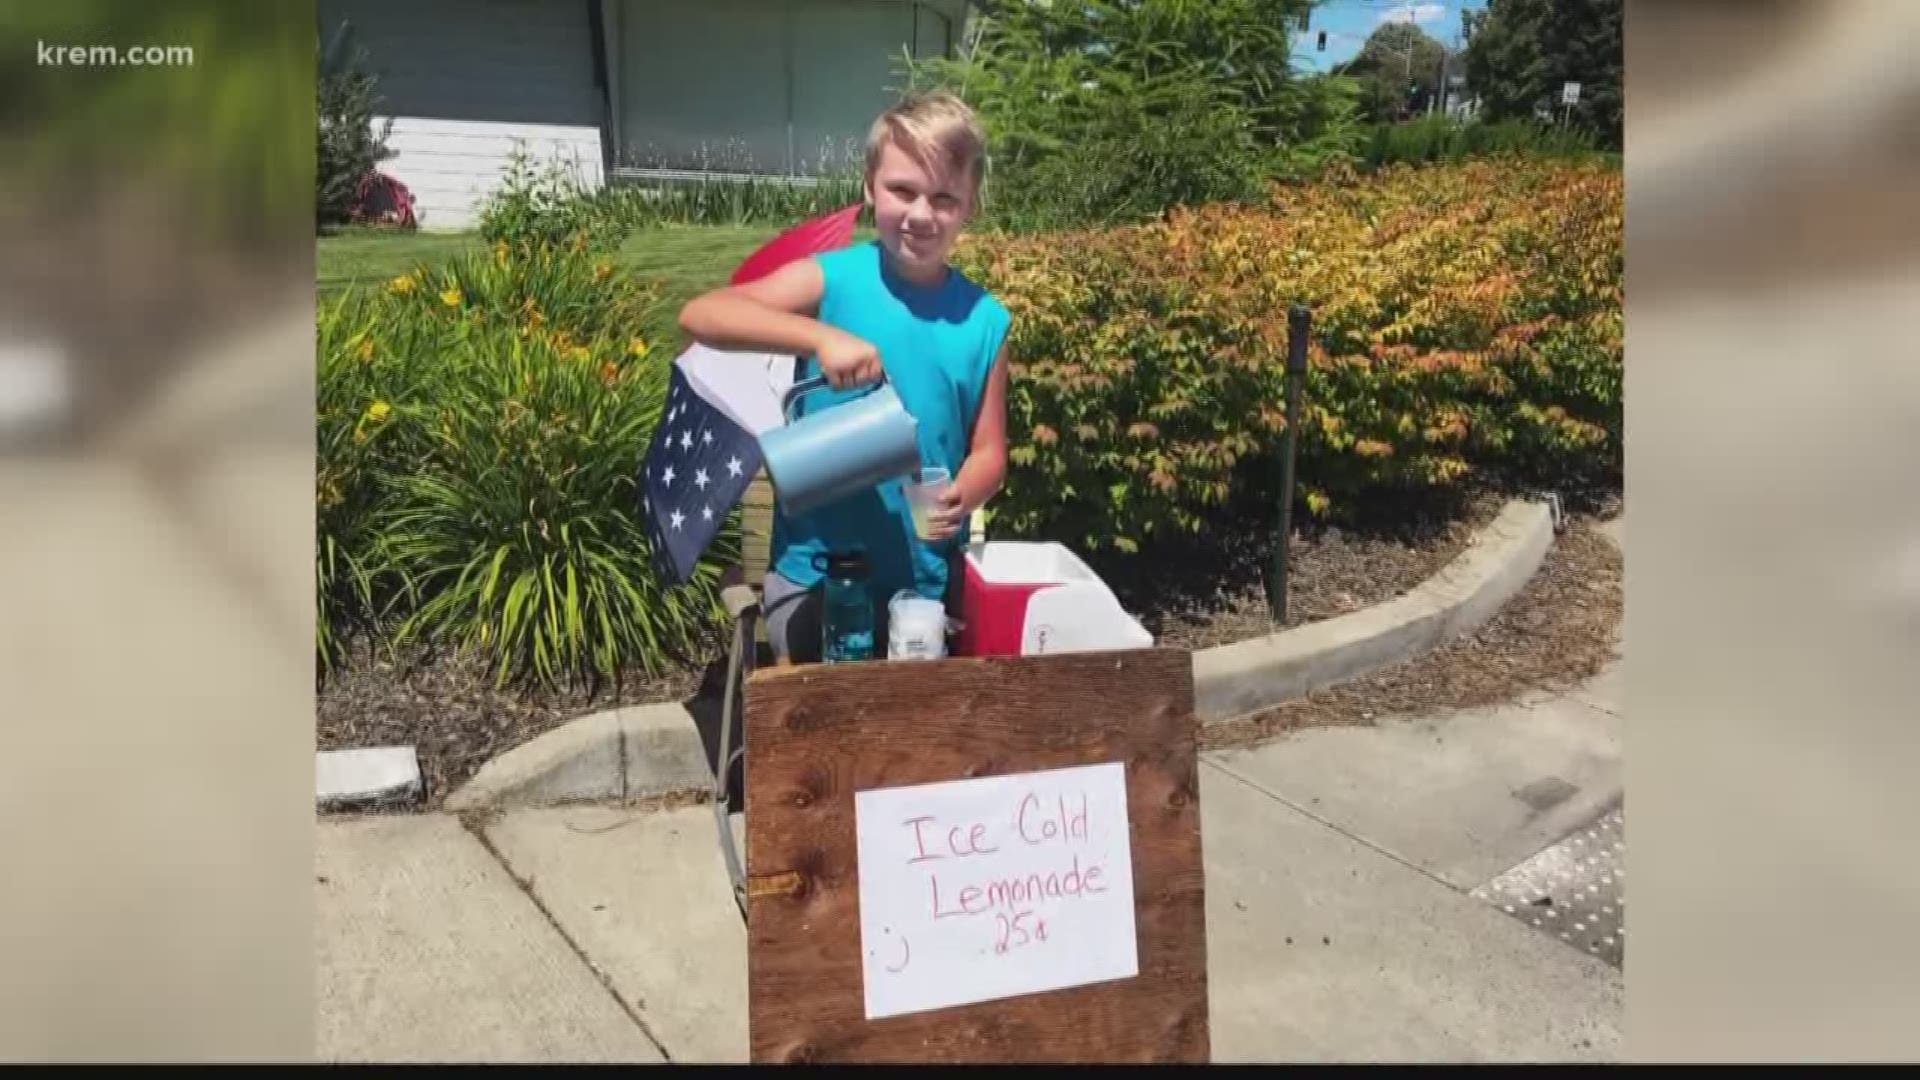 Over the course of just two days, Nick learned the Spokane community can be just as sweet as the lemonade he served.